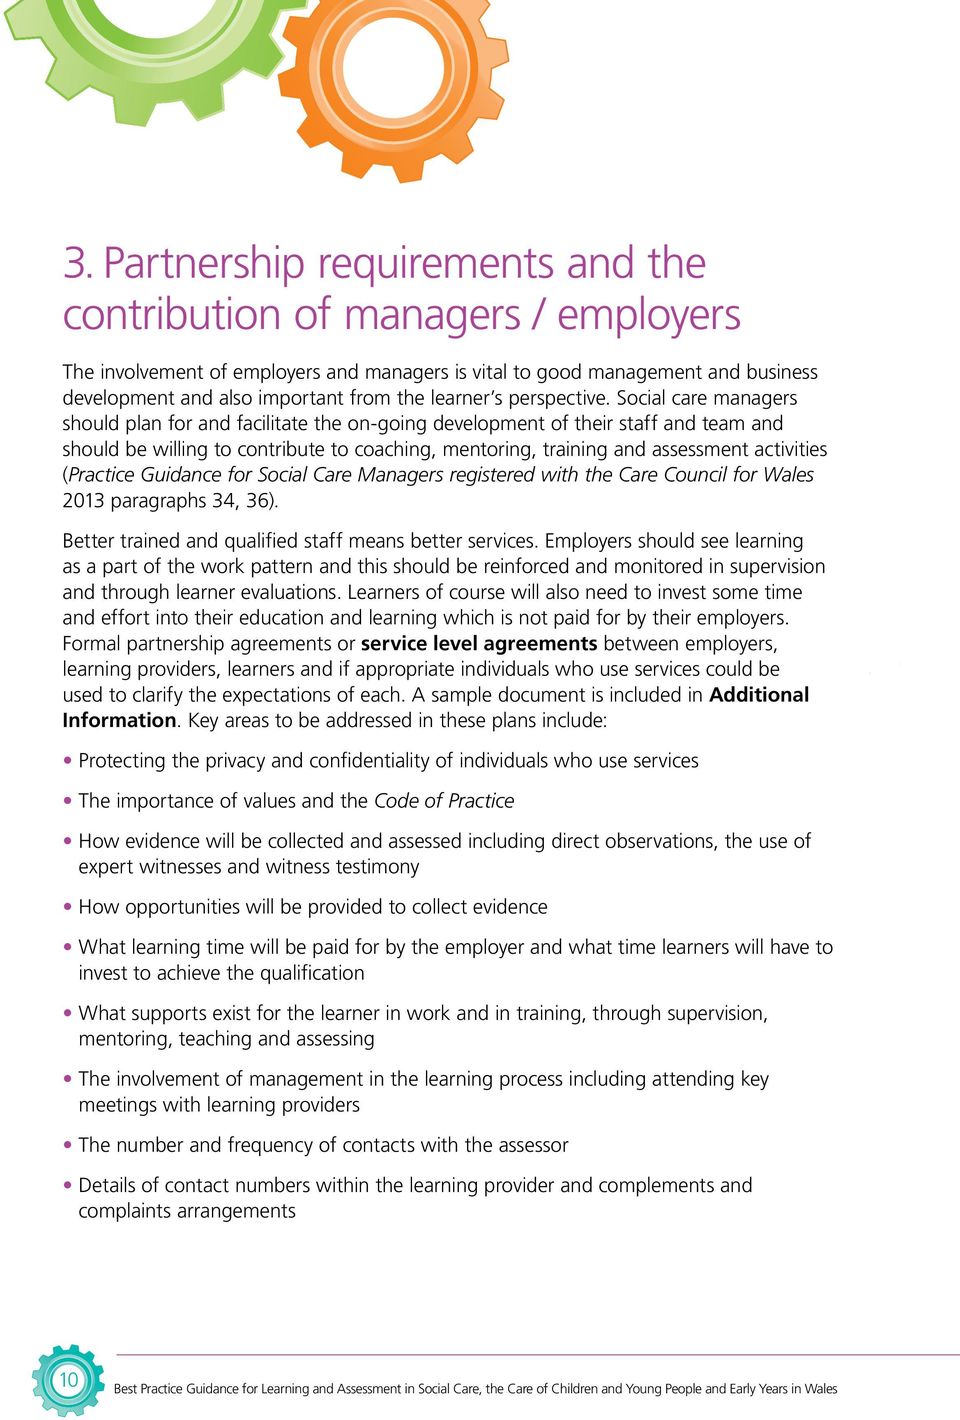 Social care managers should plan for and facilitate the on-going development of their staff and team and should be willing to contribute to coaching, mentoring, training and assessment activities